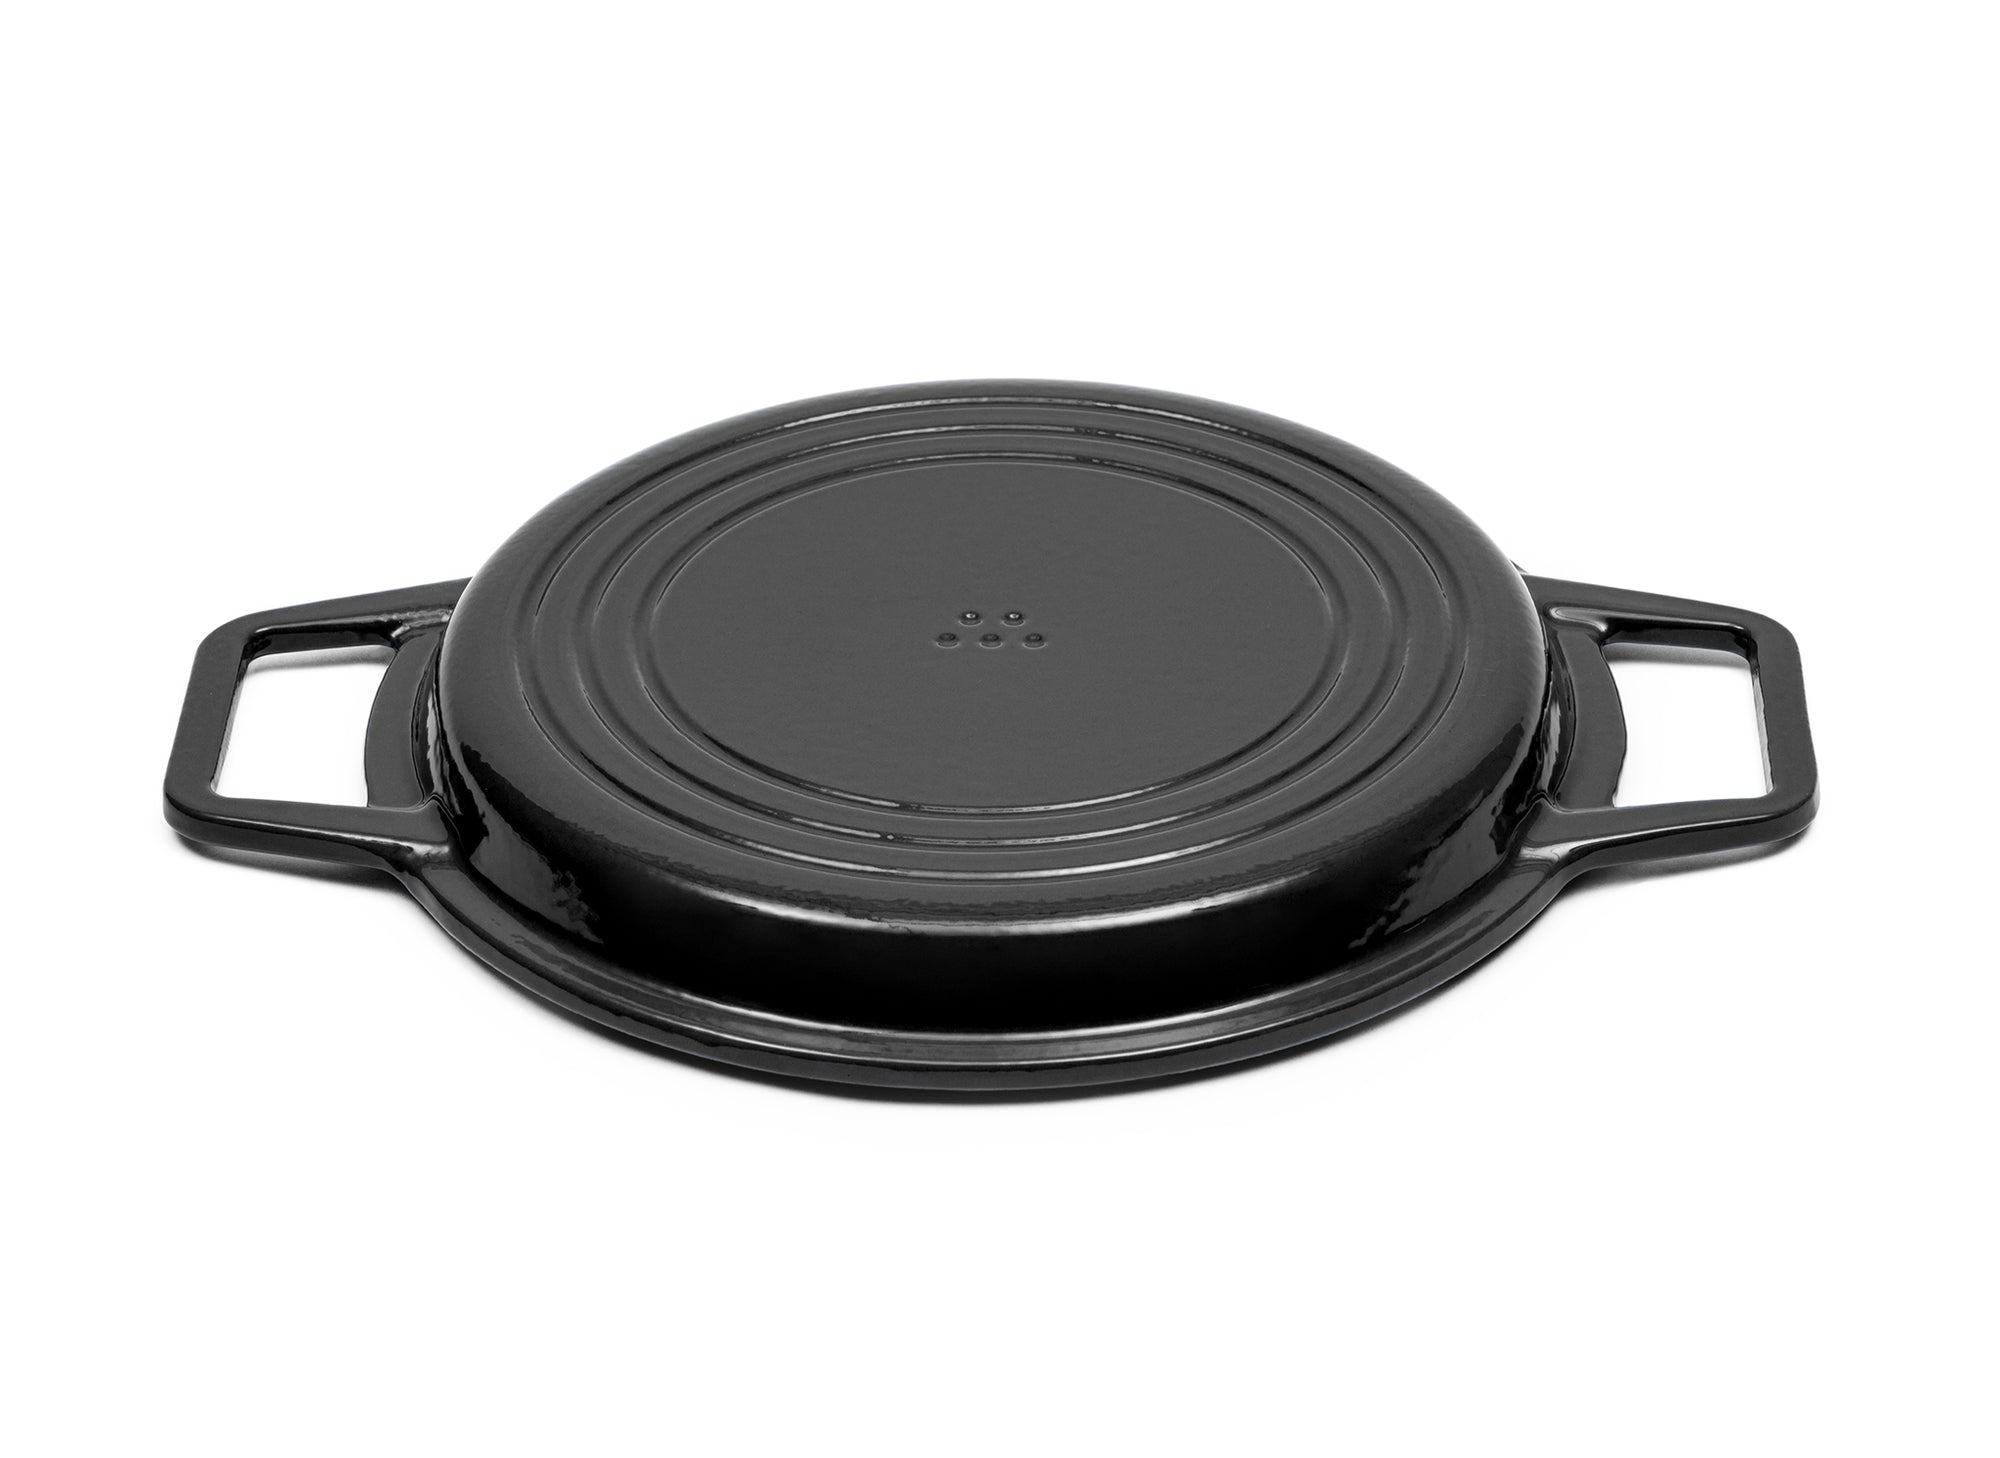 MOOSSE Premium Dutch Oven, Enameled Cast iron Pot for Induction Cooktop,  Stove, Oven, No Seasoning Required, Made in Korea, 4.2 Quarts (4L), 9.4”  (24